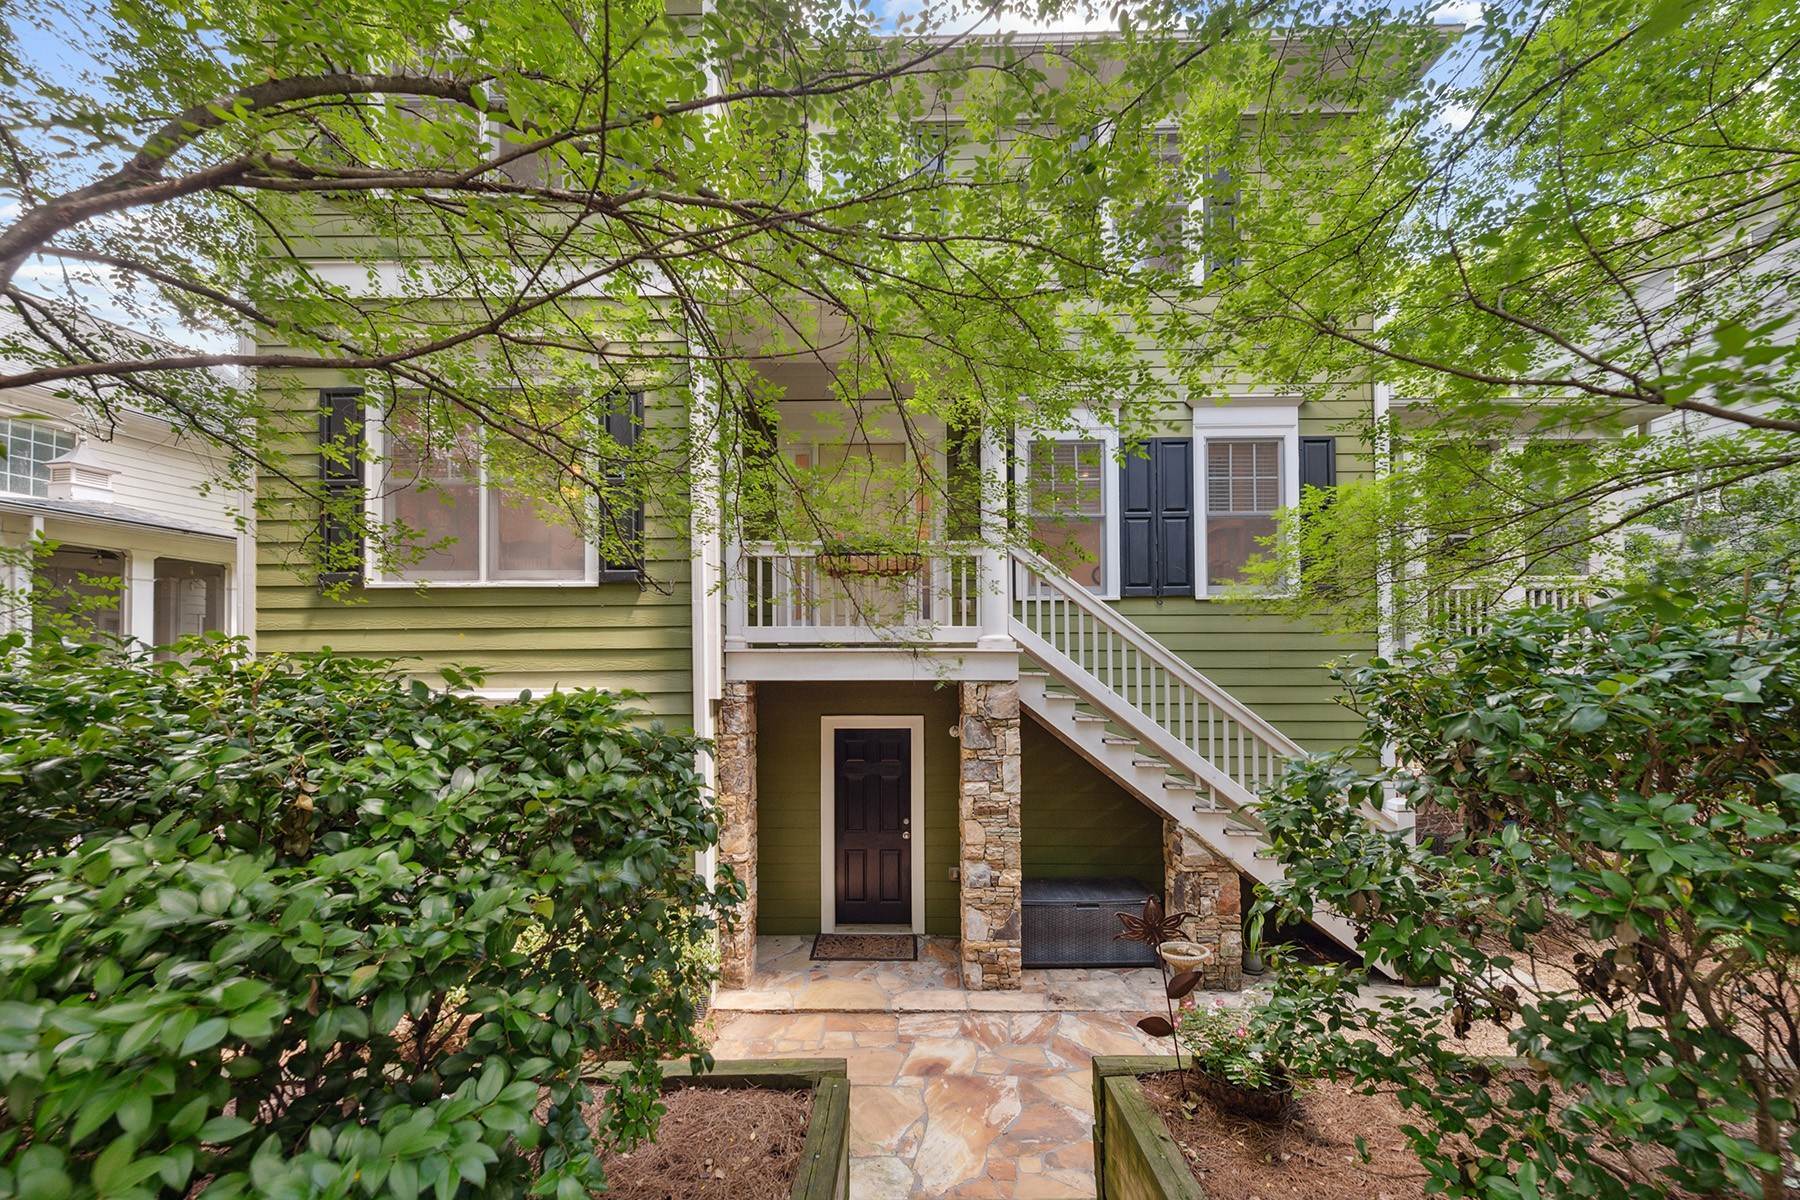 34. Single Family Homes for Sale at Gorgeous, Updated Gem with a Million-Dollar Kitchen in Morningside 1341 Edmund Park Drive Ne Atlanta, Georgia 30306 United States